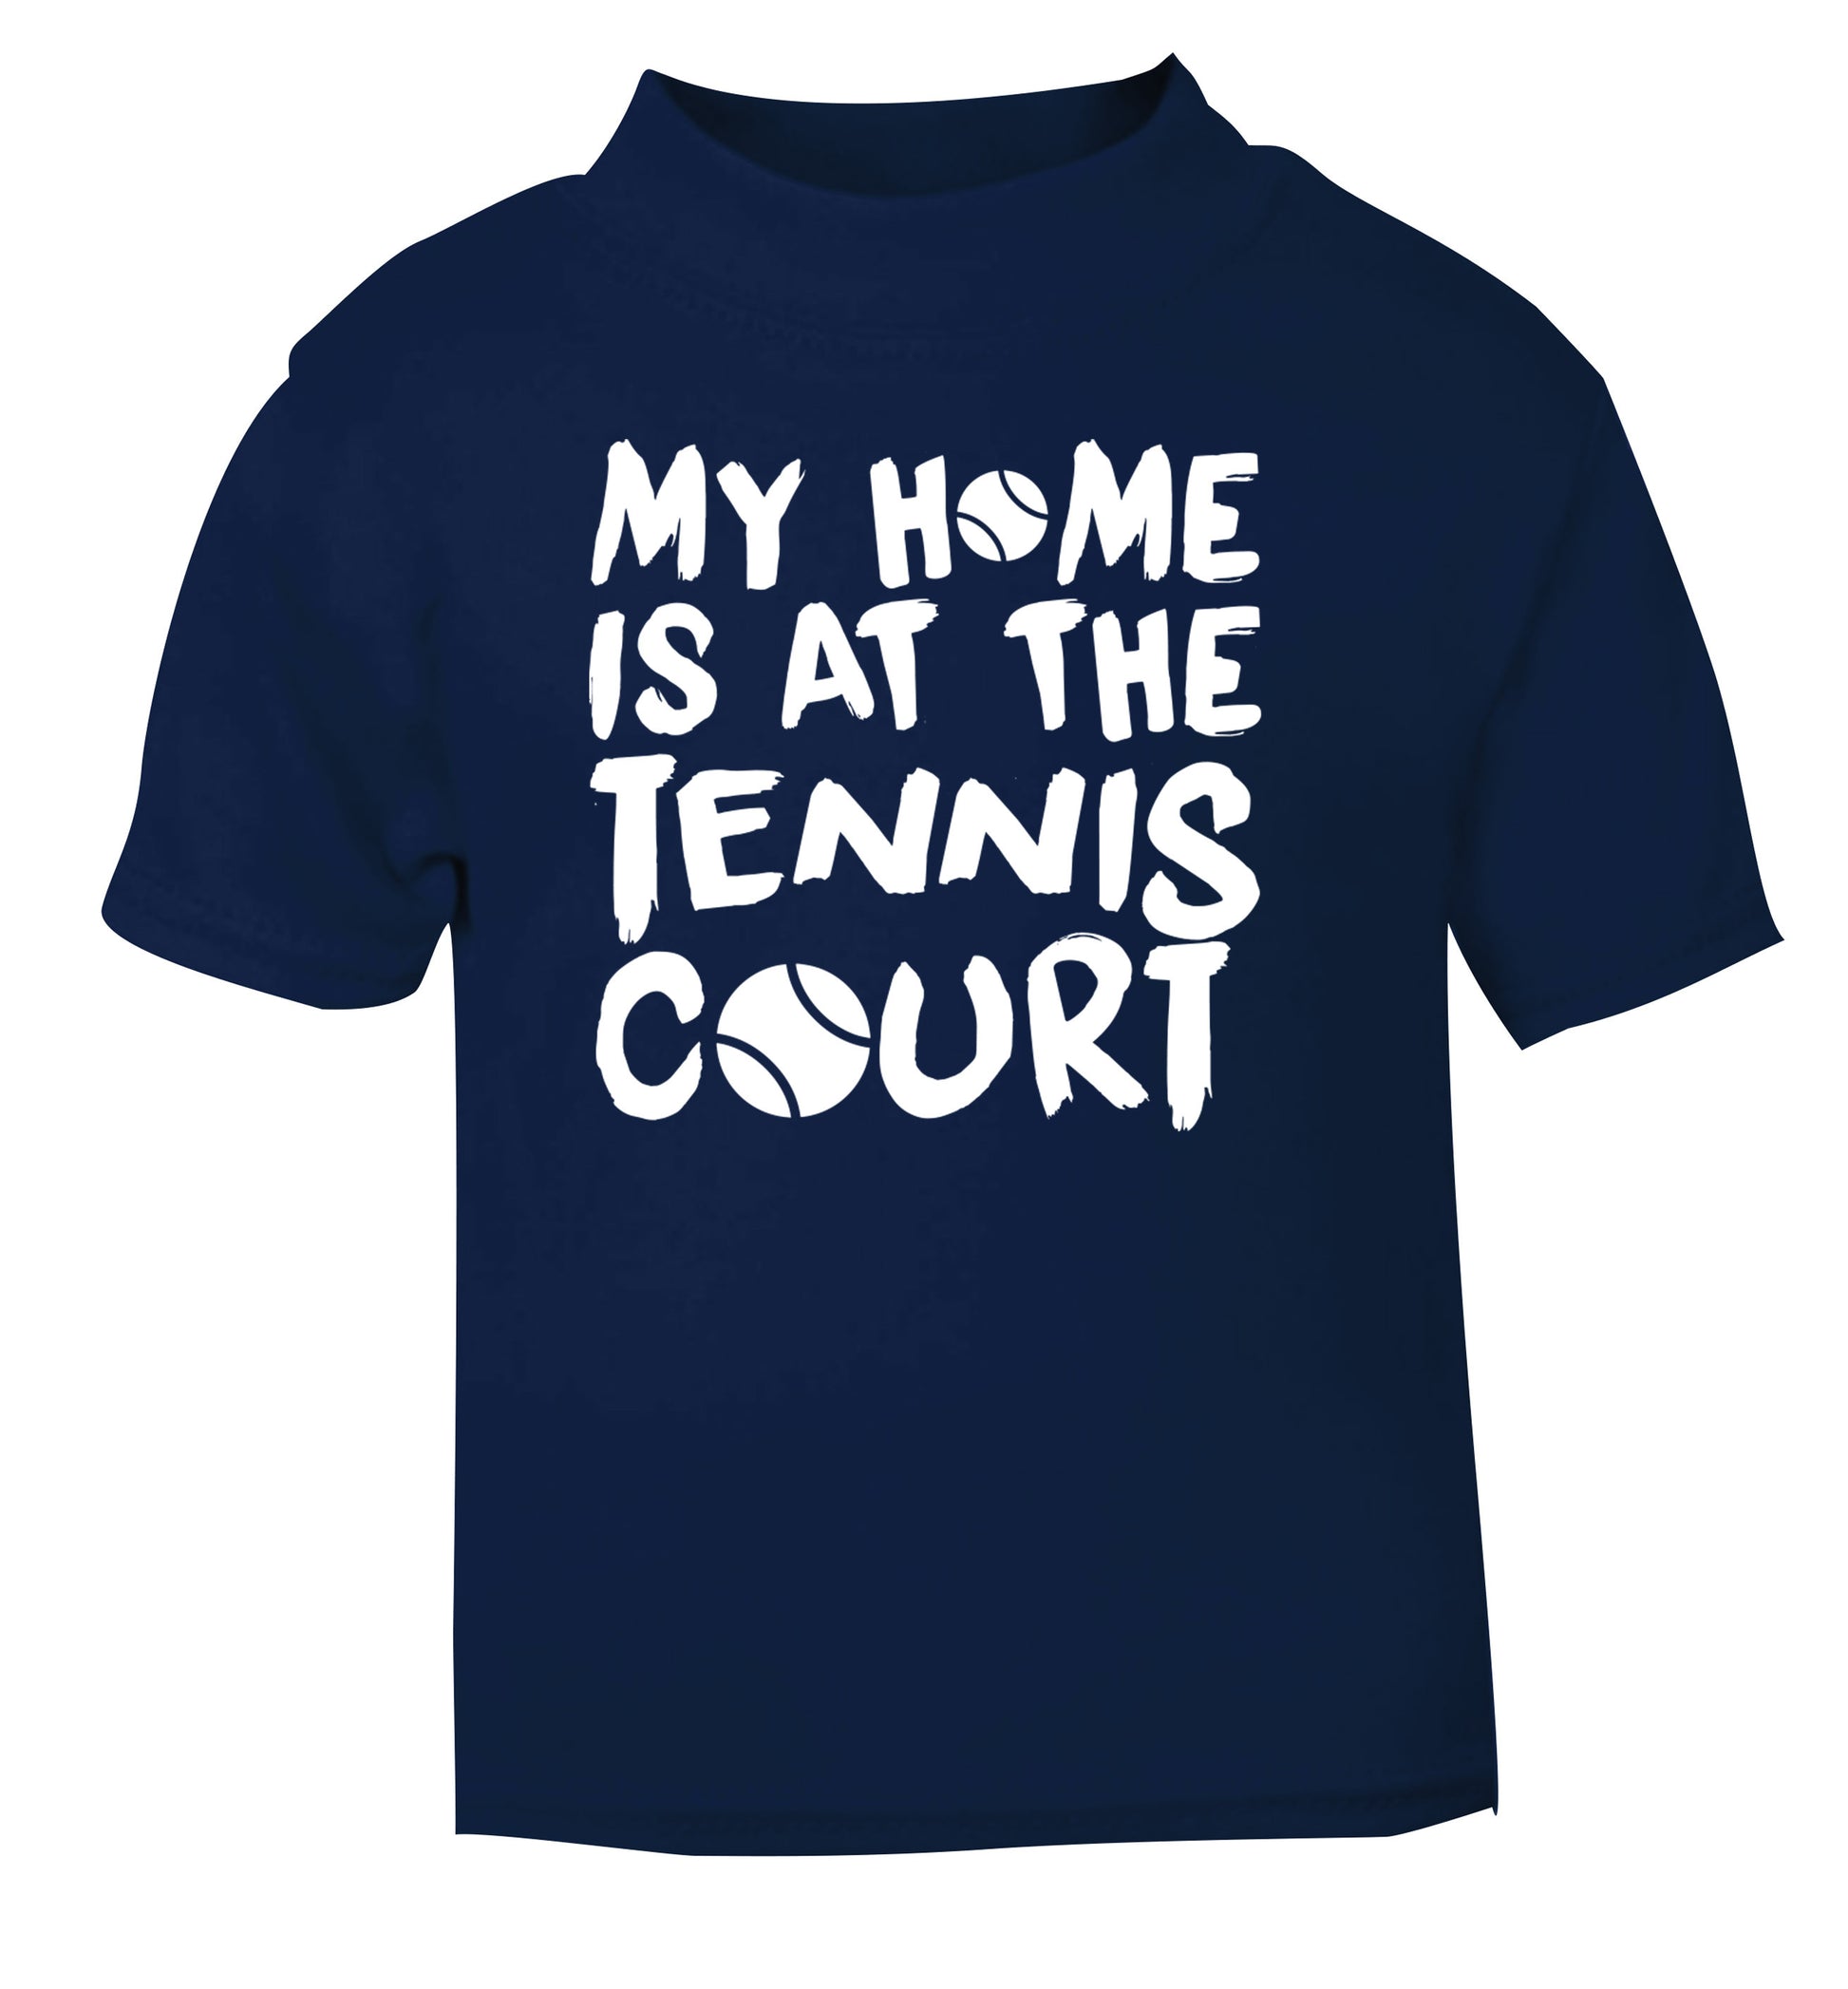 My home is at the tennis court navy Baby Toddler Tshirt 2 Years